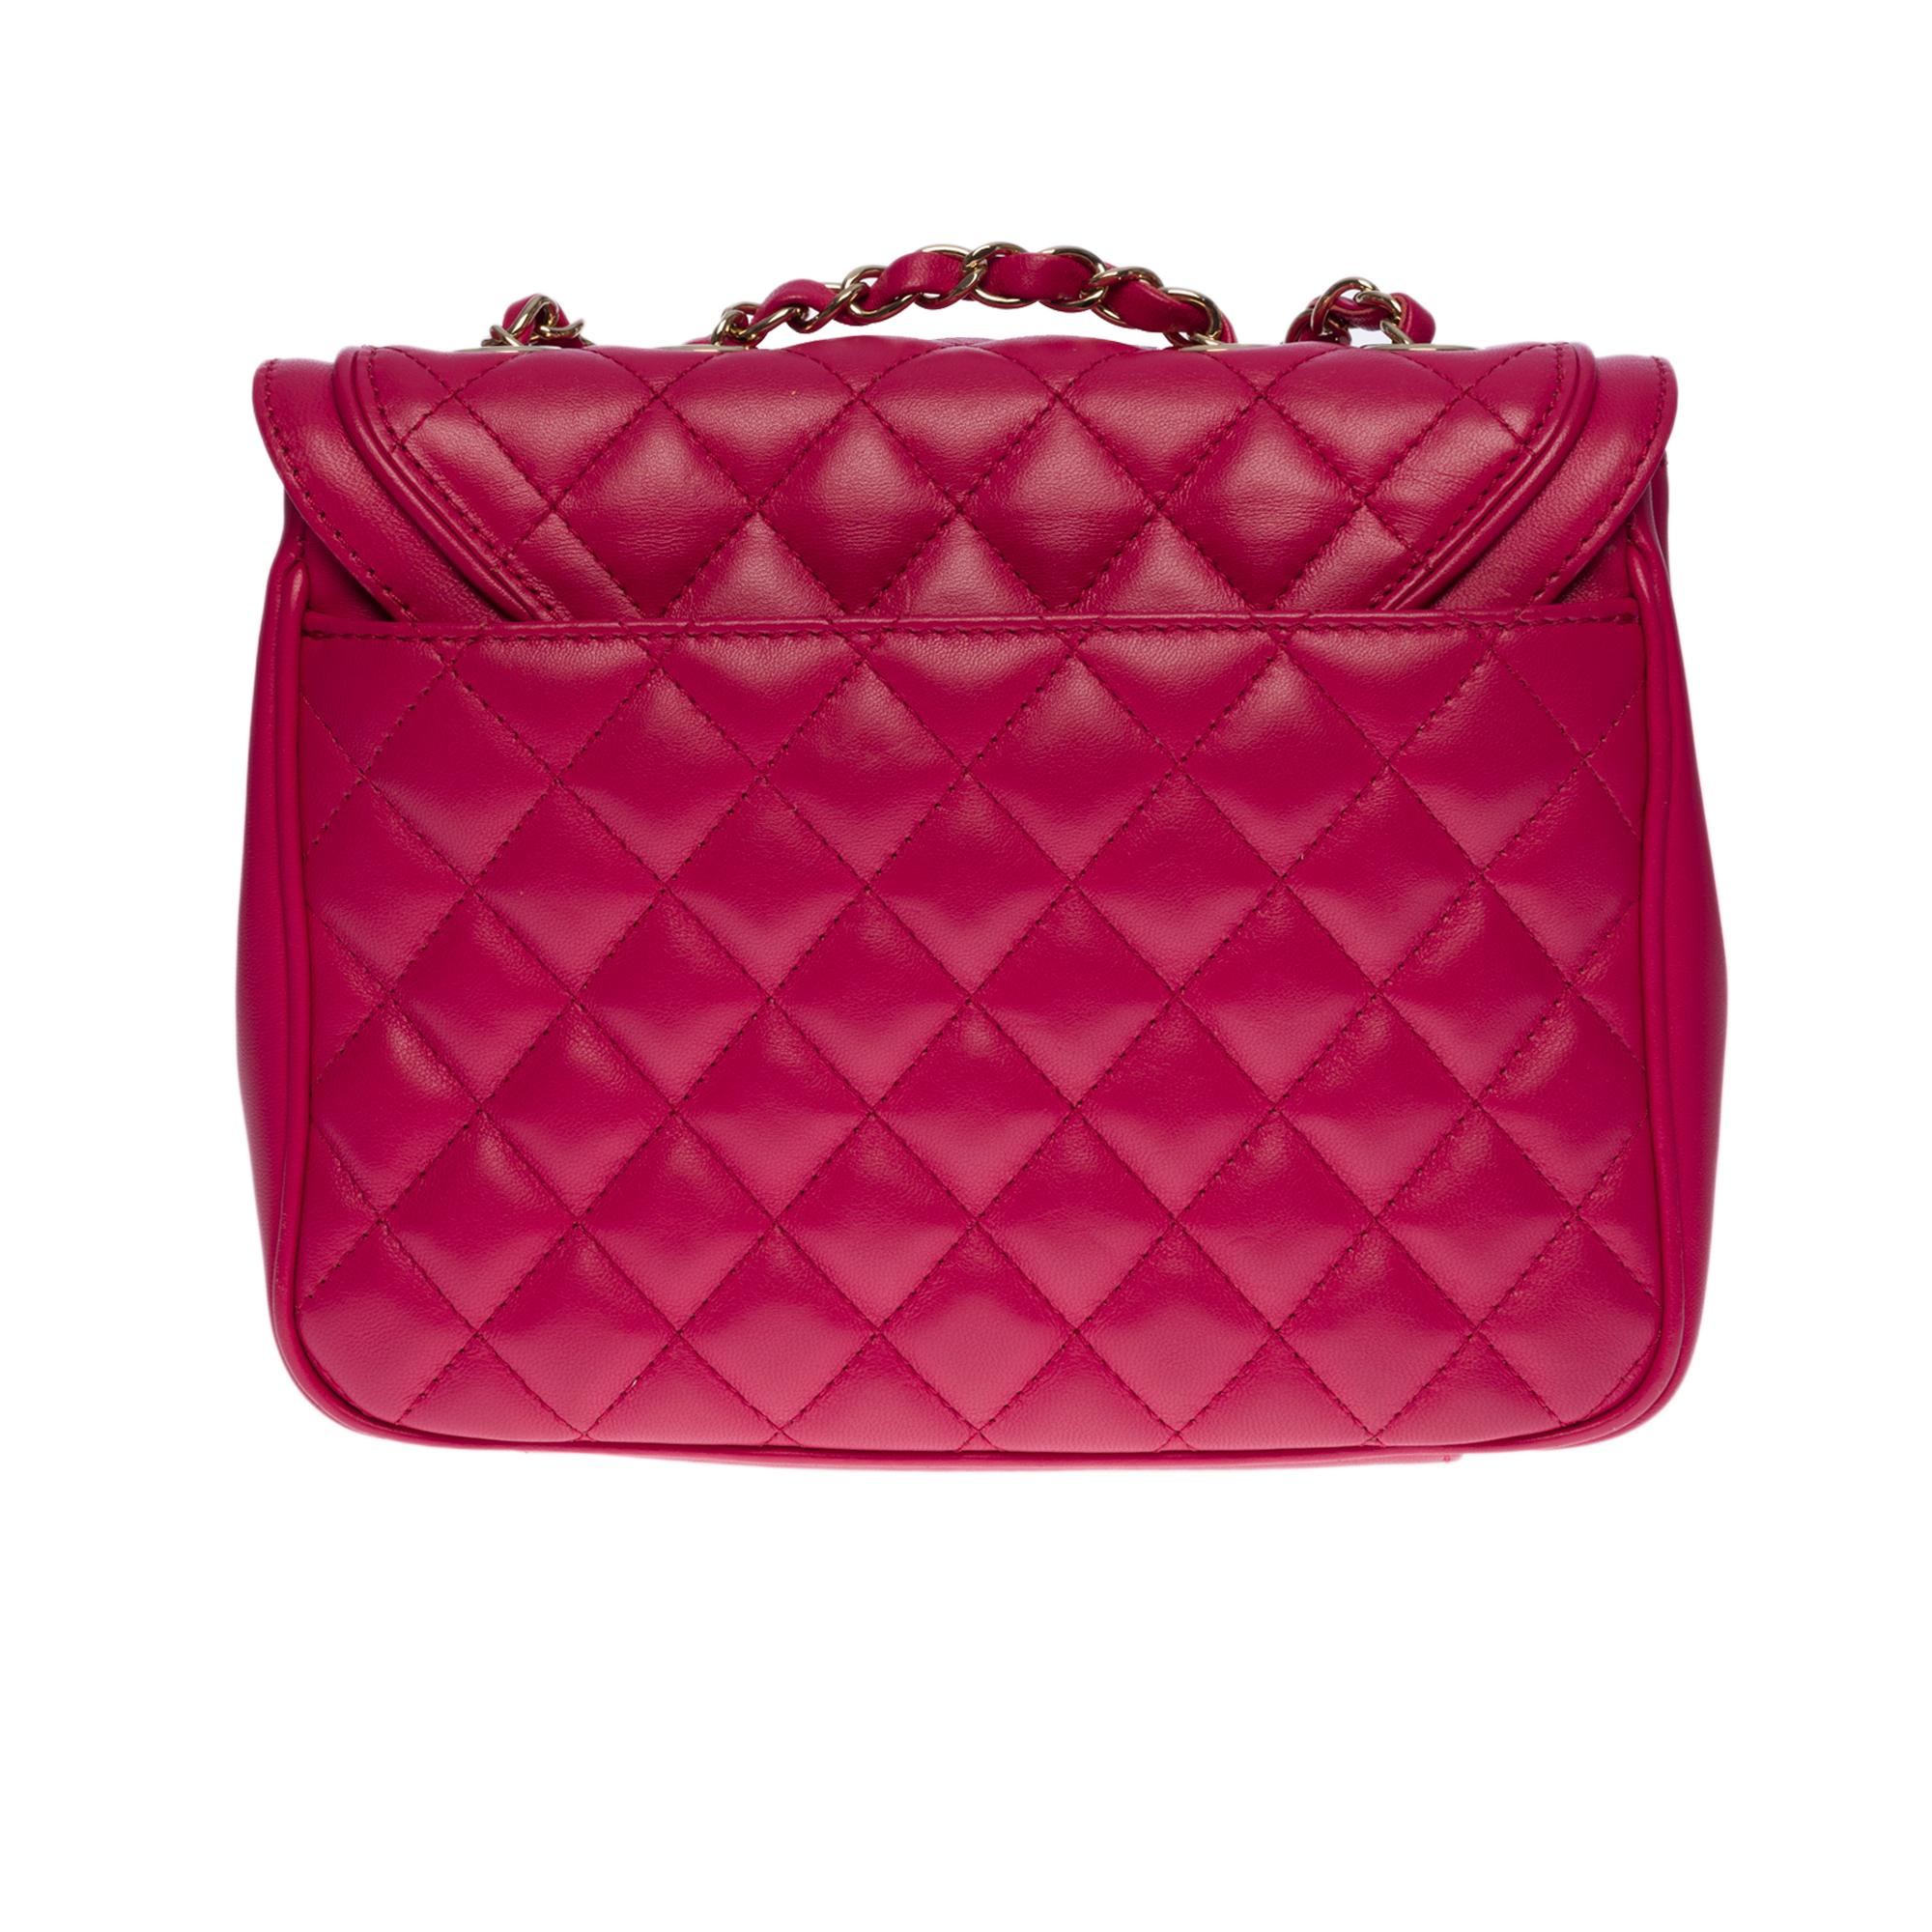 Stunning Chanel Classic shoulder flap bag in ruby pink quilted lambskin leather, champagne metal hardware, a champagne metal chain handle interlaced with ruby pink leather allowing a shoulder or shoulder strap
Fabric backpack pocket
Flap closure,